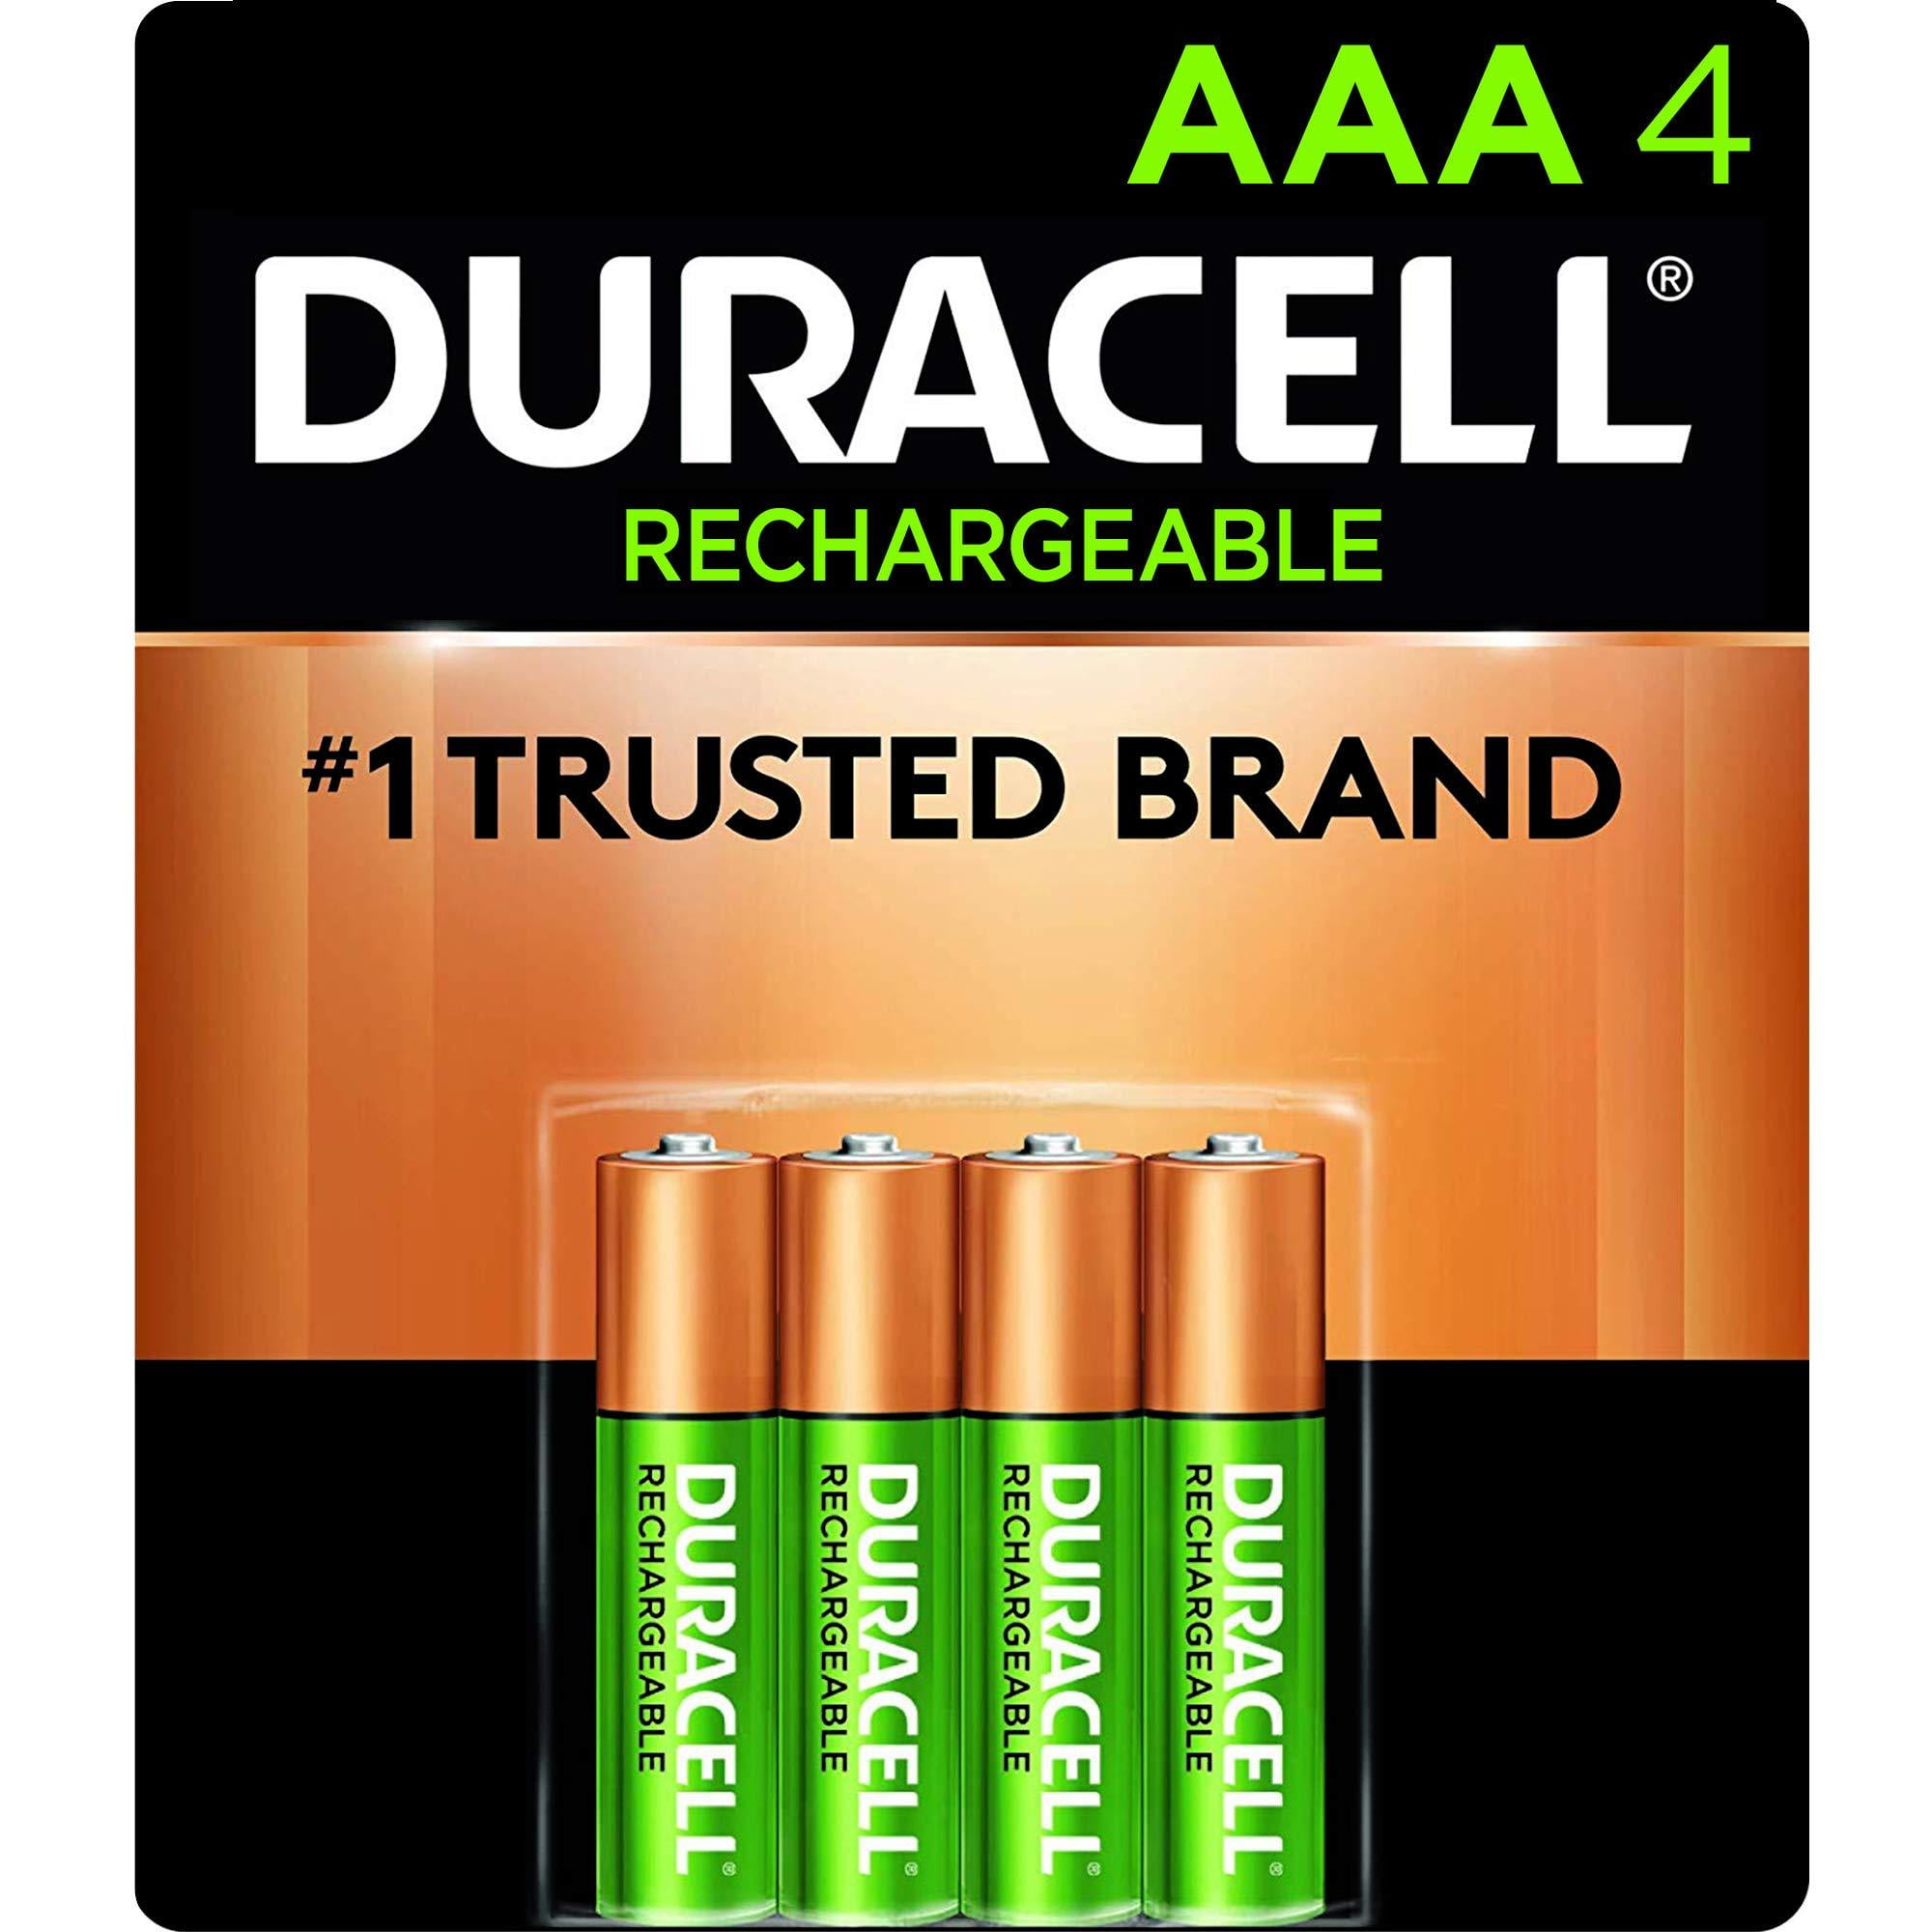 Duracell - Rechargeable AAA Batteries - Long Lasting, All-Purpose Triple A  Battery for Household and Business - 4 Count